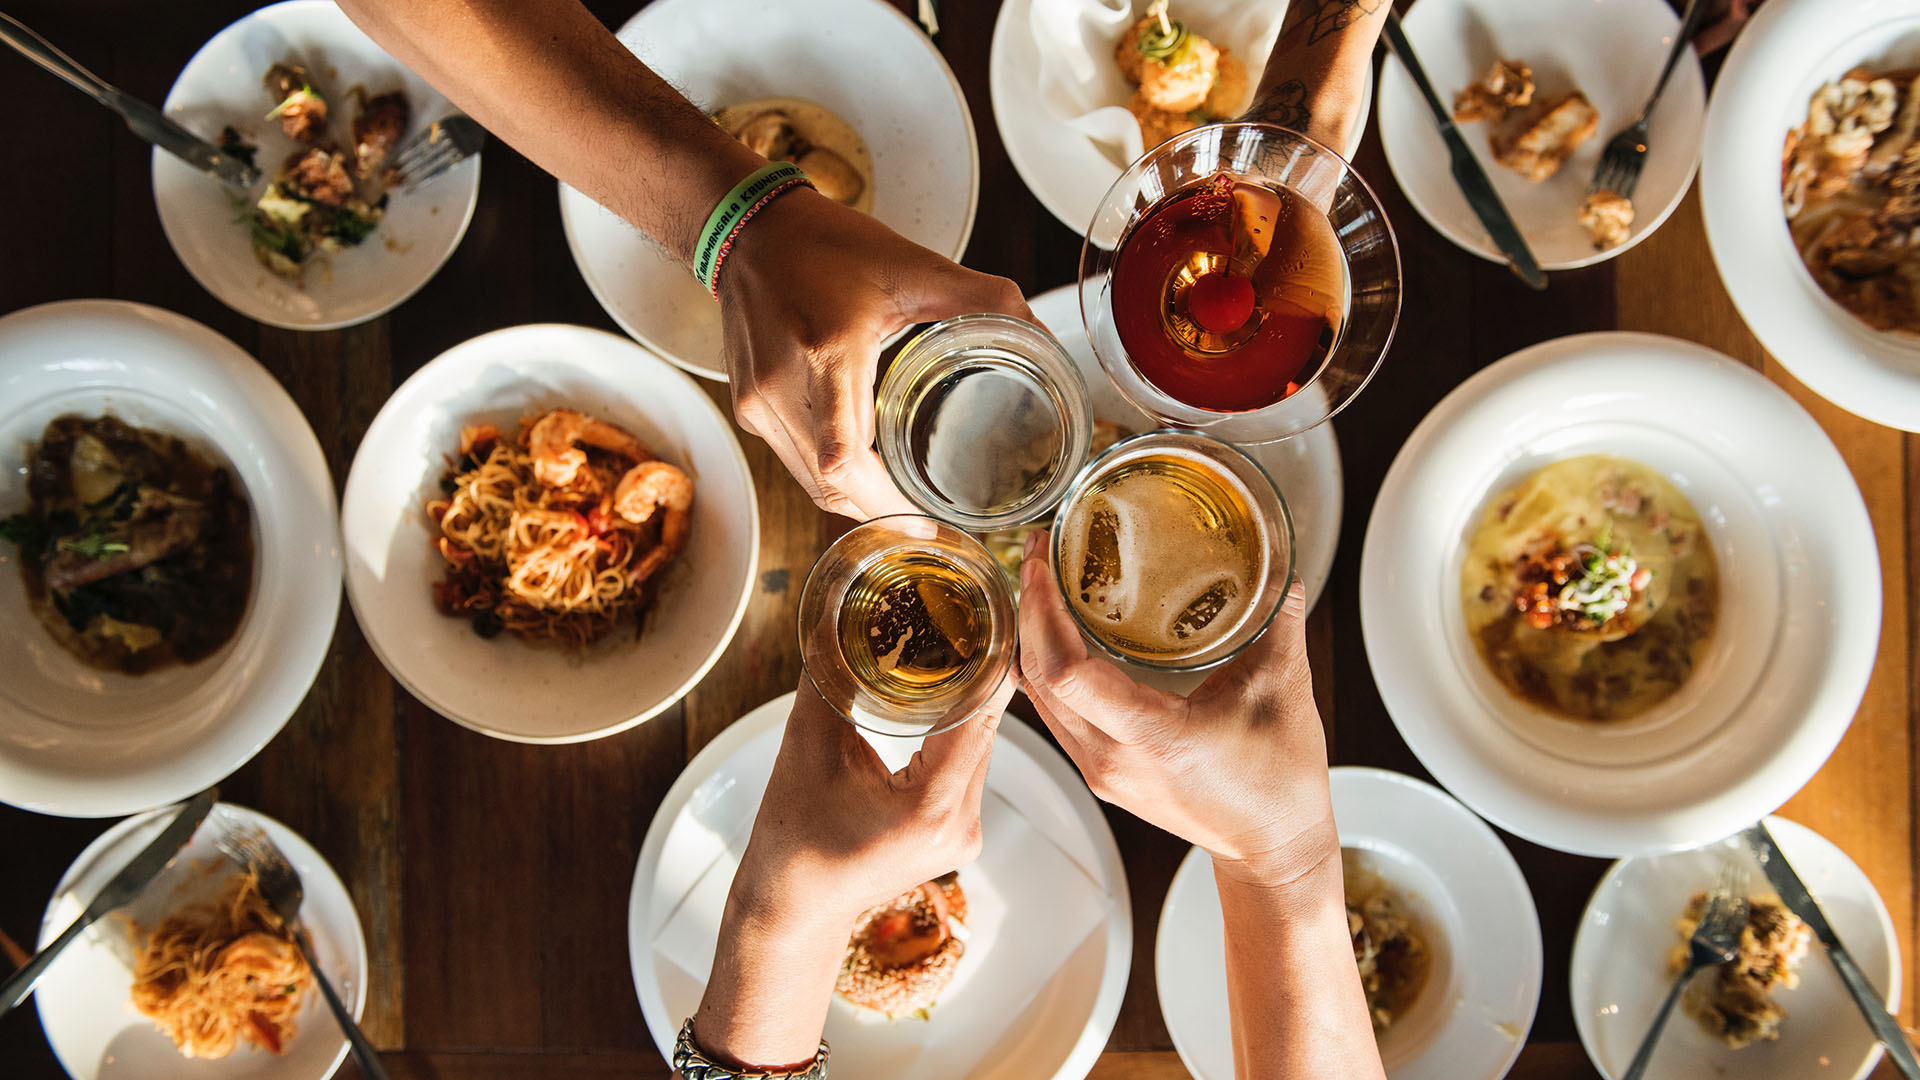 Why are beer and food now such a trendy pair even in restaurants?